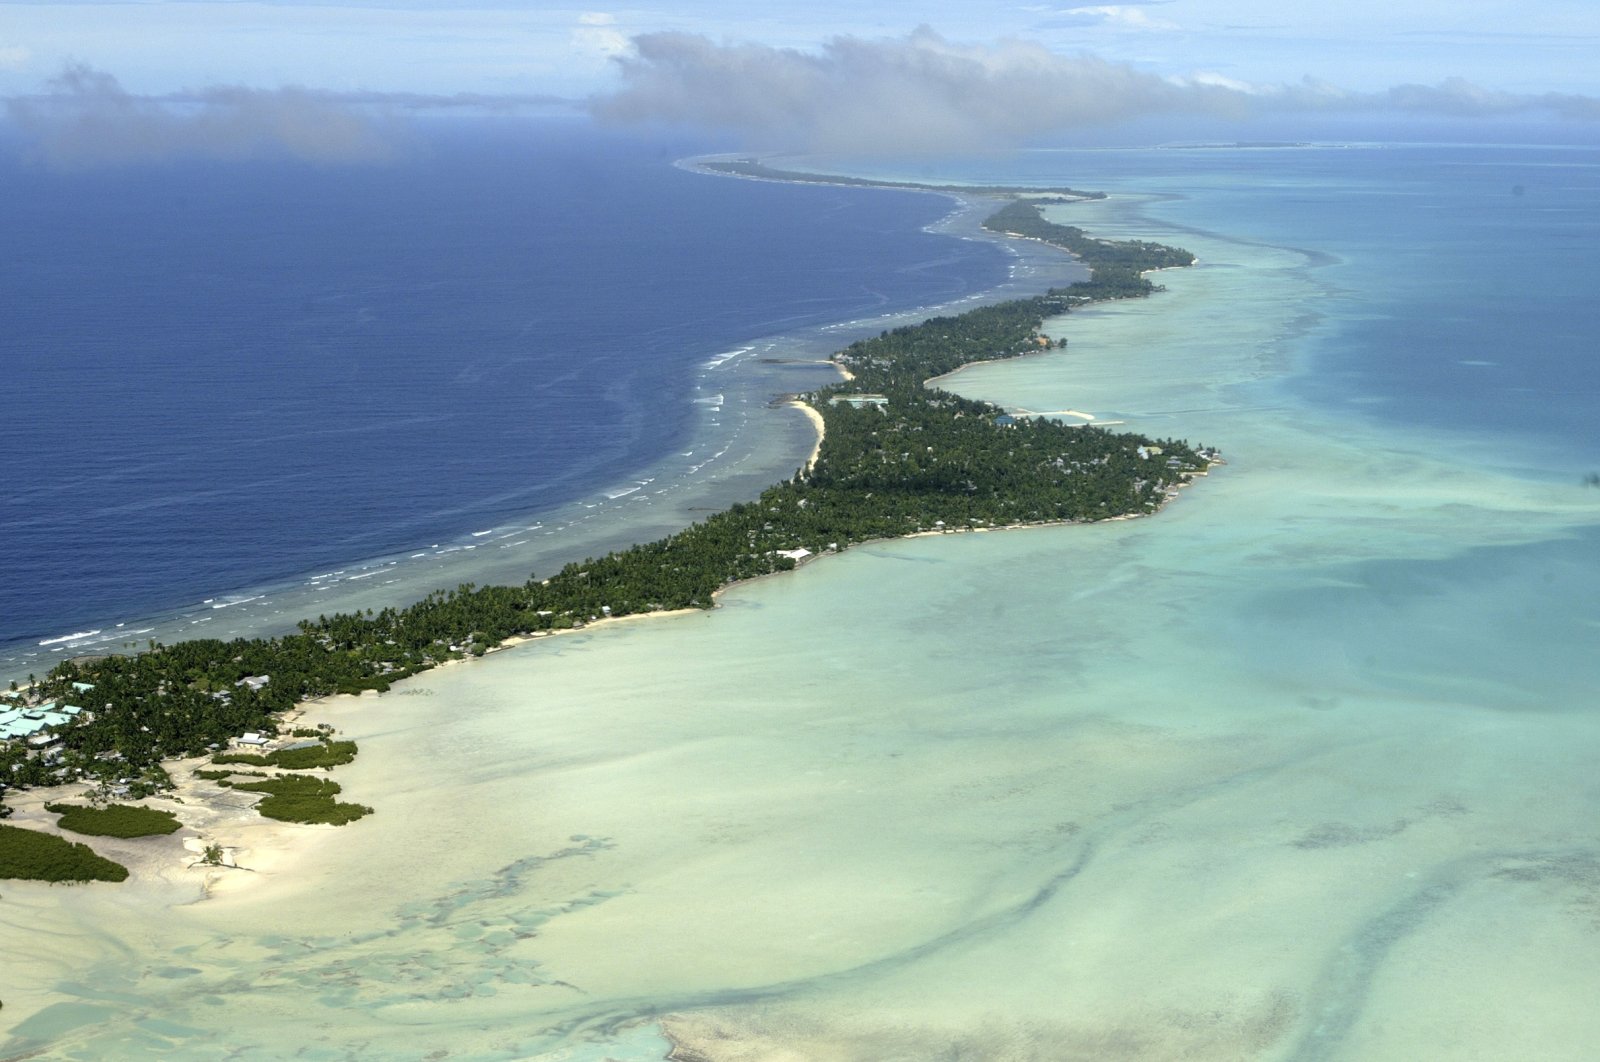 Kiribati and several other small Pacific nations were among the last on the planet to have avoided any virus outbreaks, thanks to their remote locations and strict border controls, Tarawa atoll, Kiribati, March 30, 2004. (AP Photo)